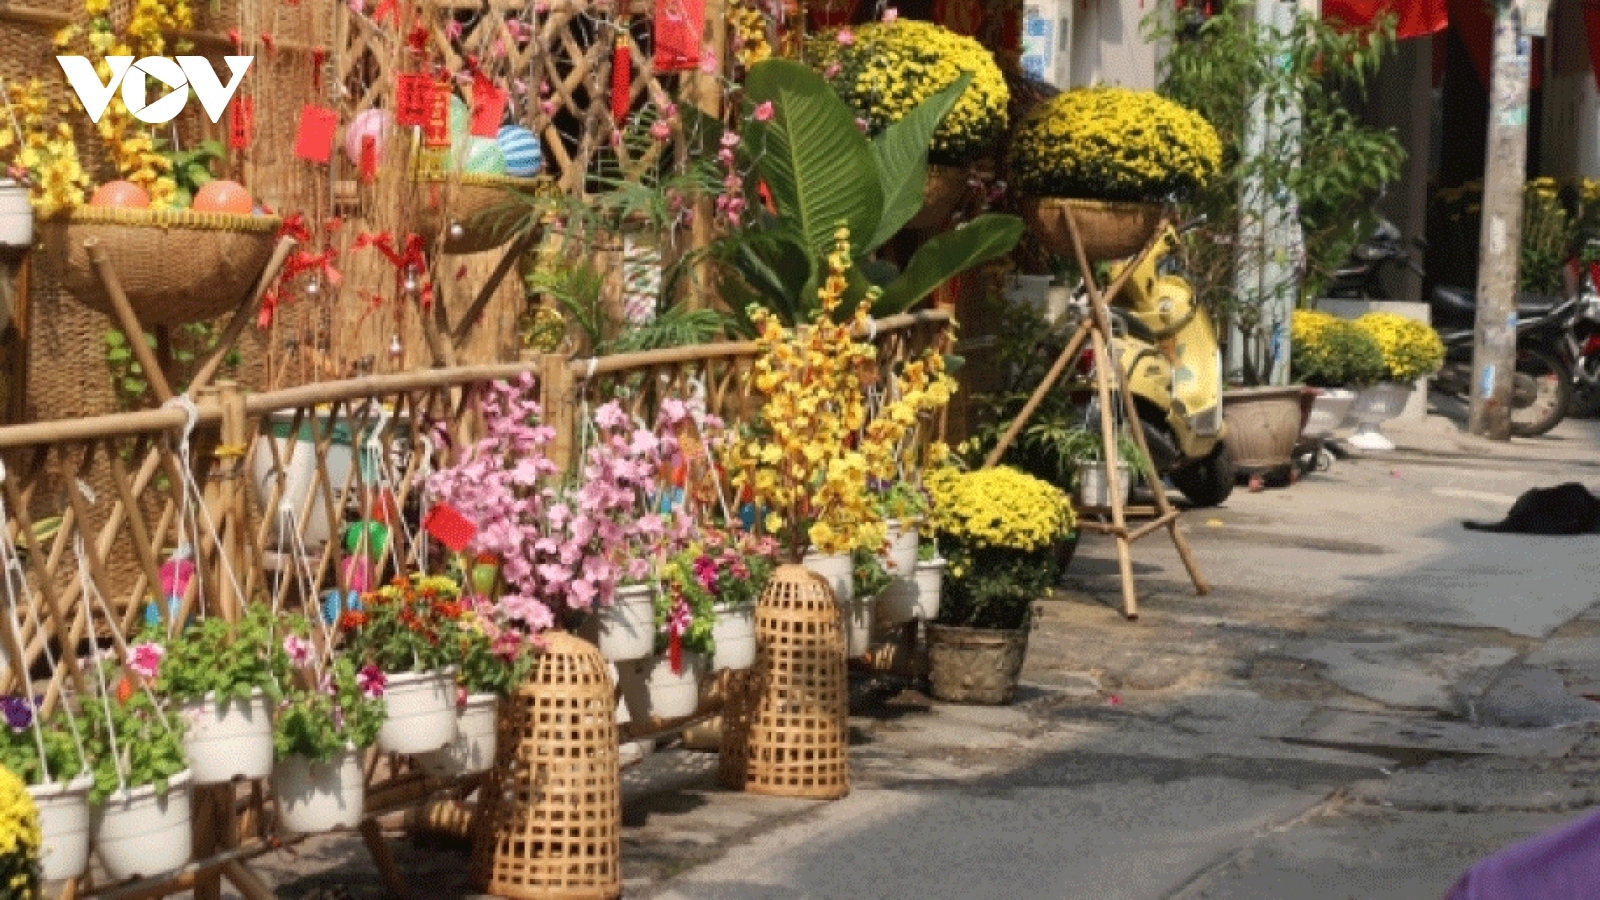 Tet decorations spring up in every HCM City corner